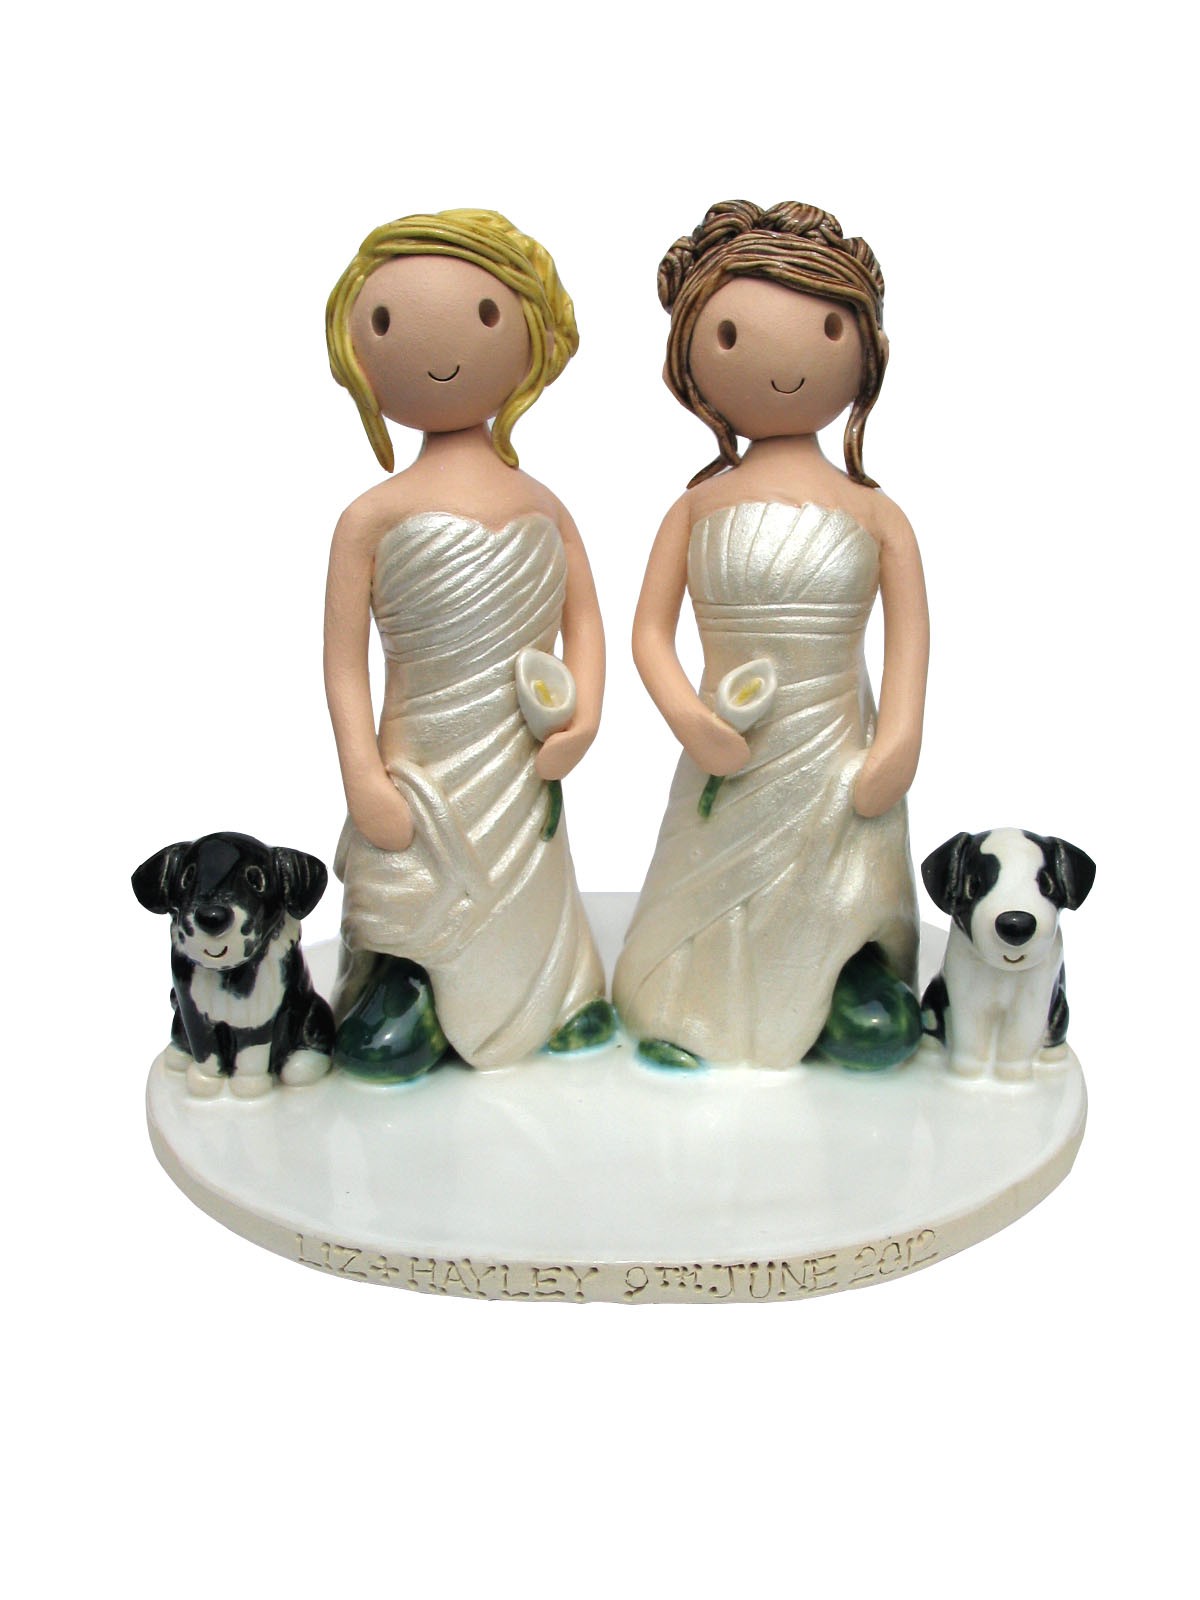 http://www.wedding-cake-toppers.co.uk/wp-content/uploads/2012/08/May-2012-0078.jpg